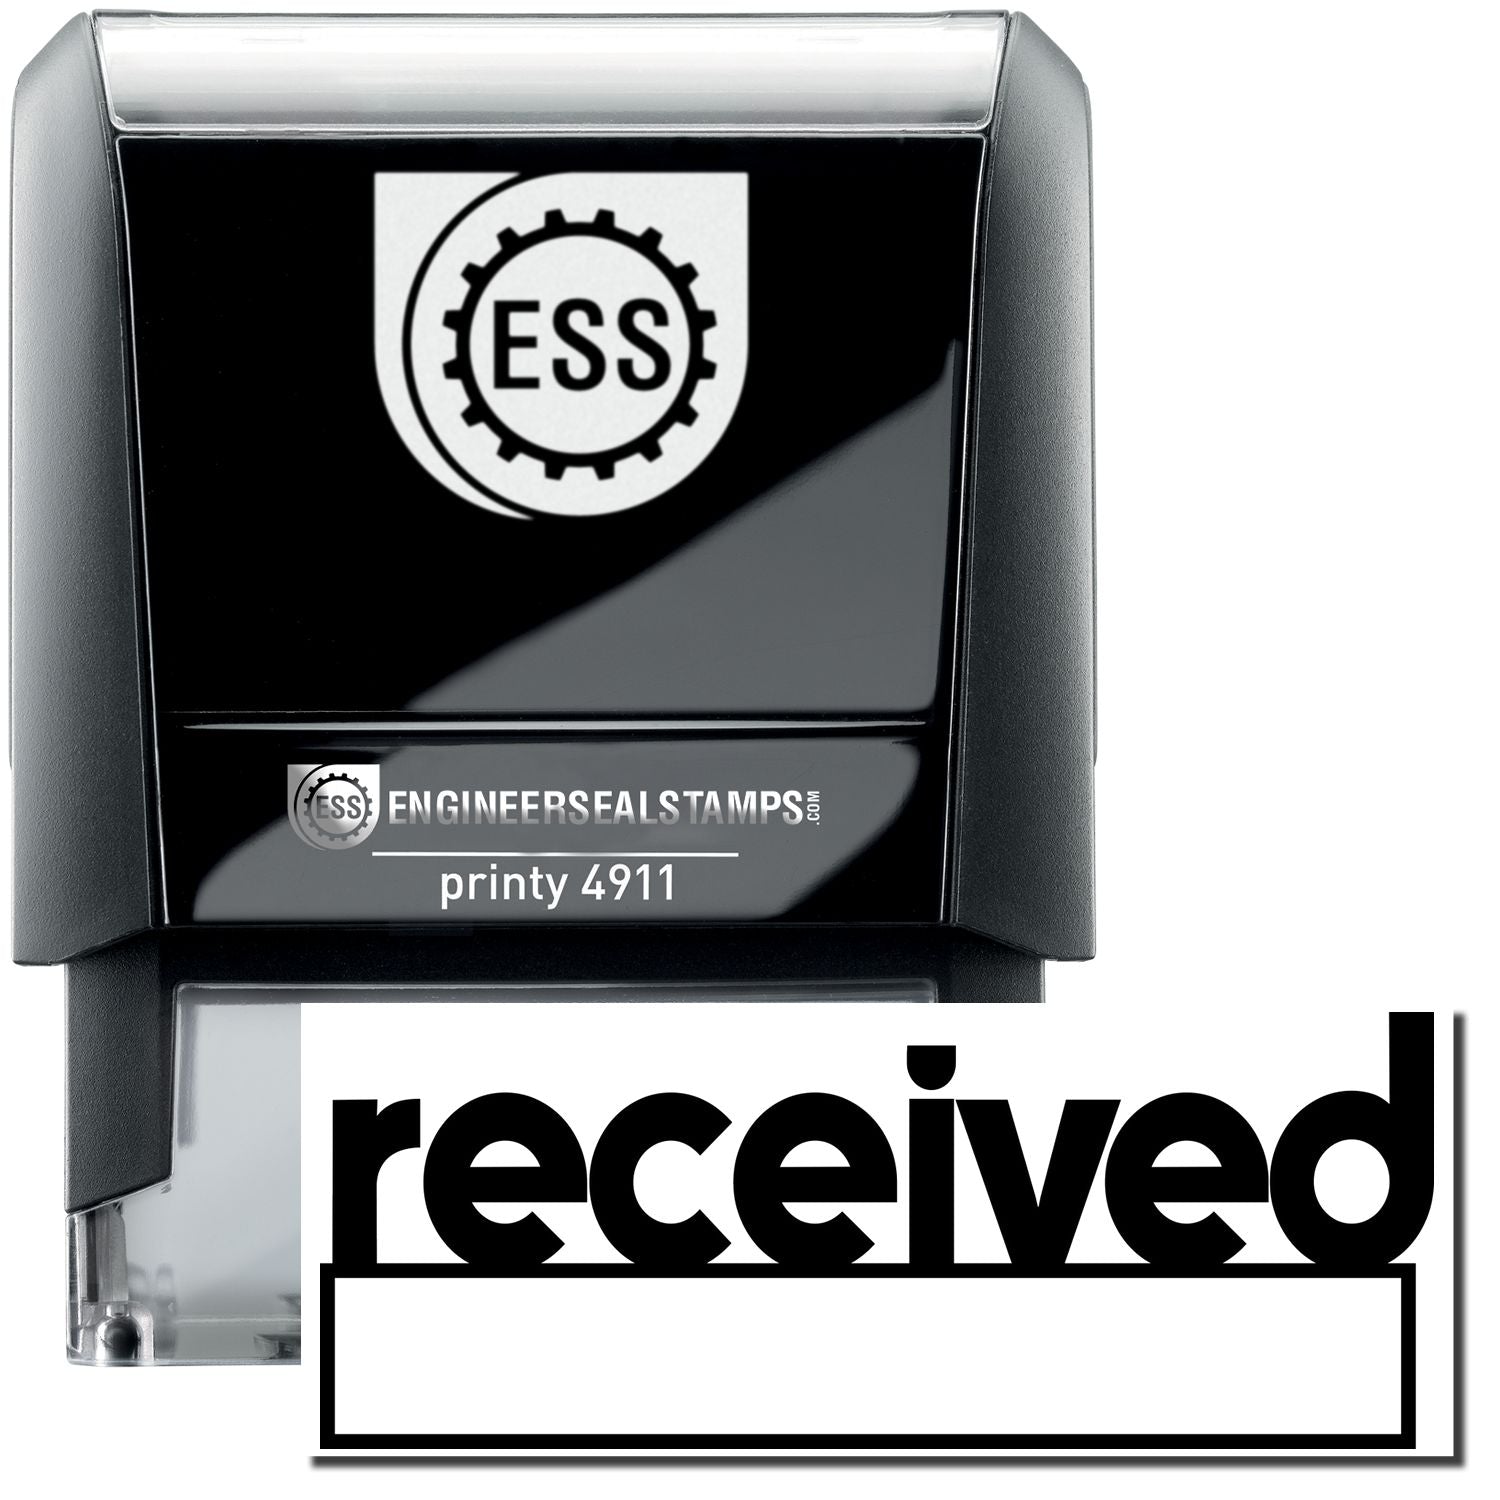 A self-inking stamp with a stamped image showing how the text "received" in lowercase with a date box under it is displayed after stamping.